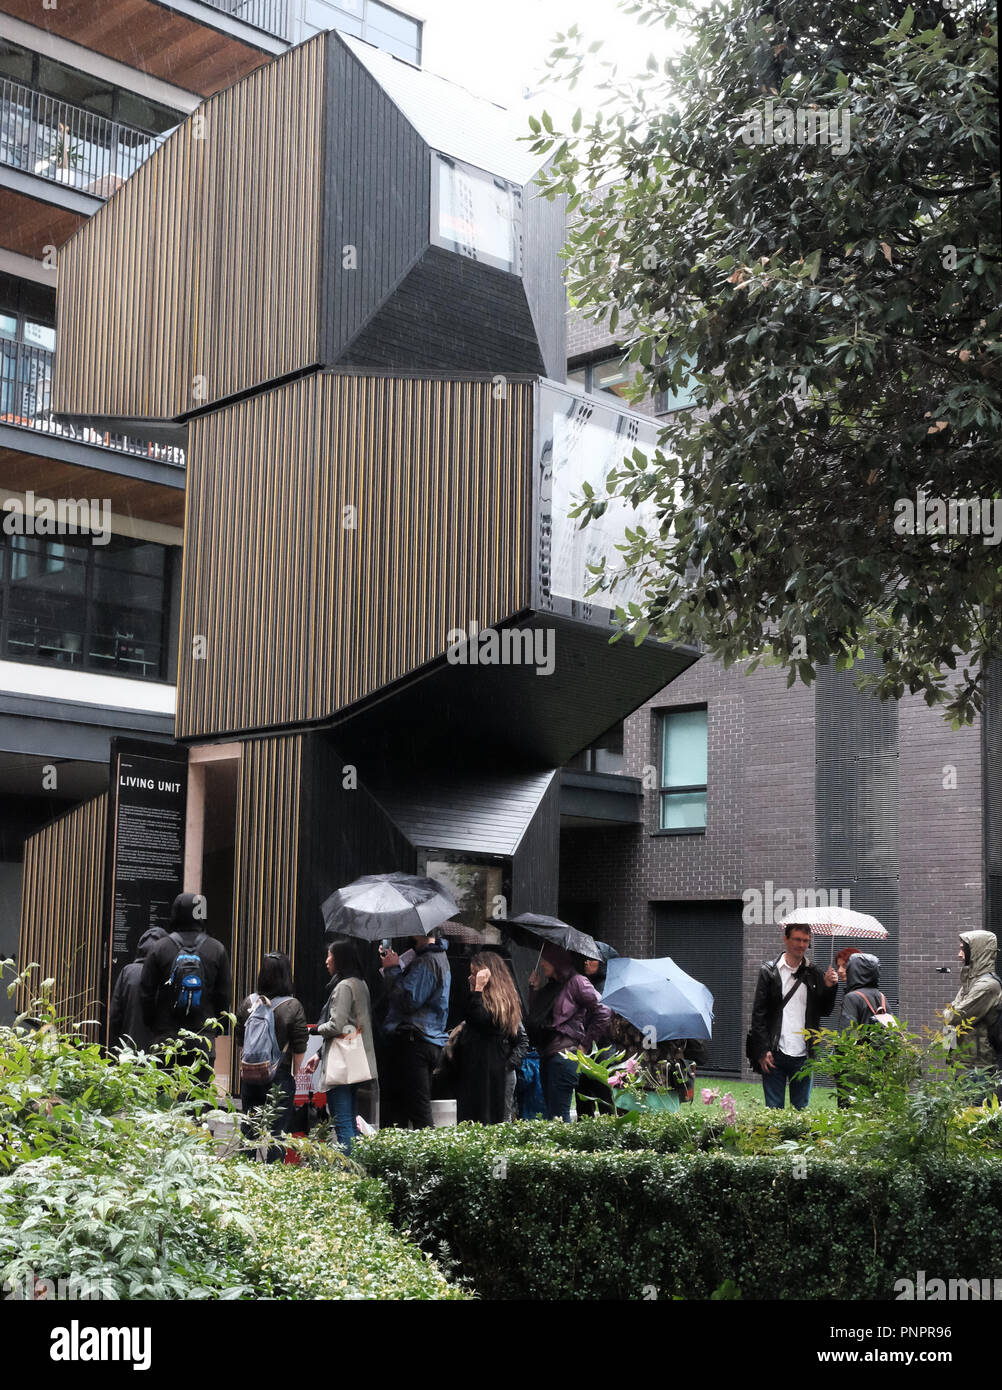 1 Old Street Yard, Old Street, London, England 22nd Sept. 2018 UK Weather Queuing in the rain to view the Living Unit London installation as part of Open House London 2018. This adaptable design comprises three modular pods, offering insight into innovative space-saving design solutions OFIS Architects, 2017. At White Collar Factory. Credit: Judi Saunders/Alamy Live News Stock Photo